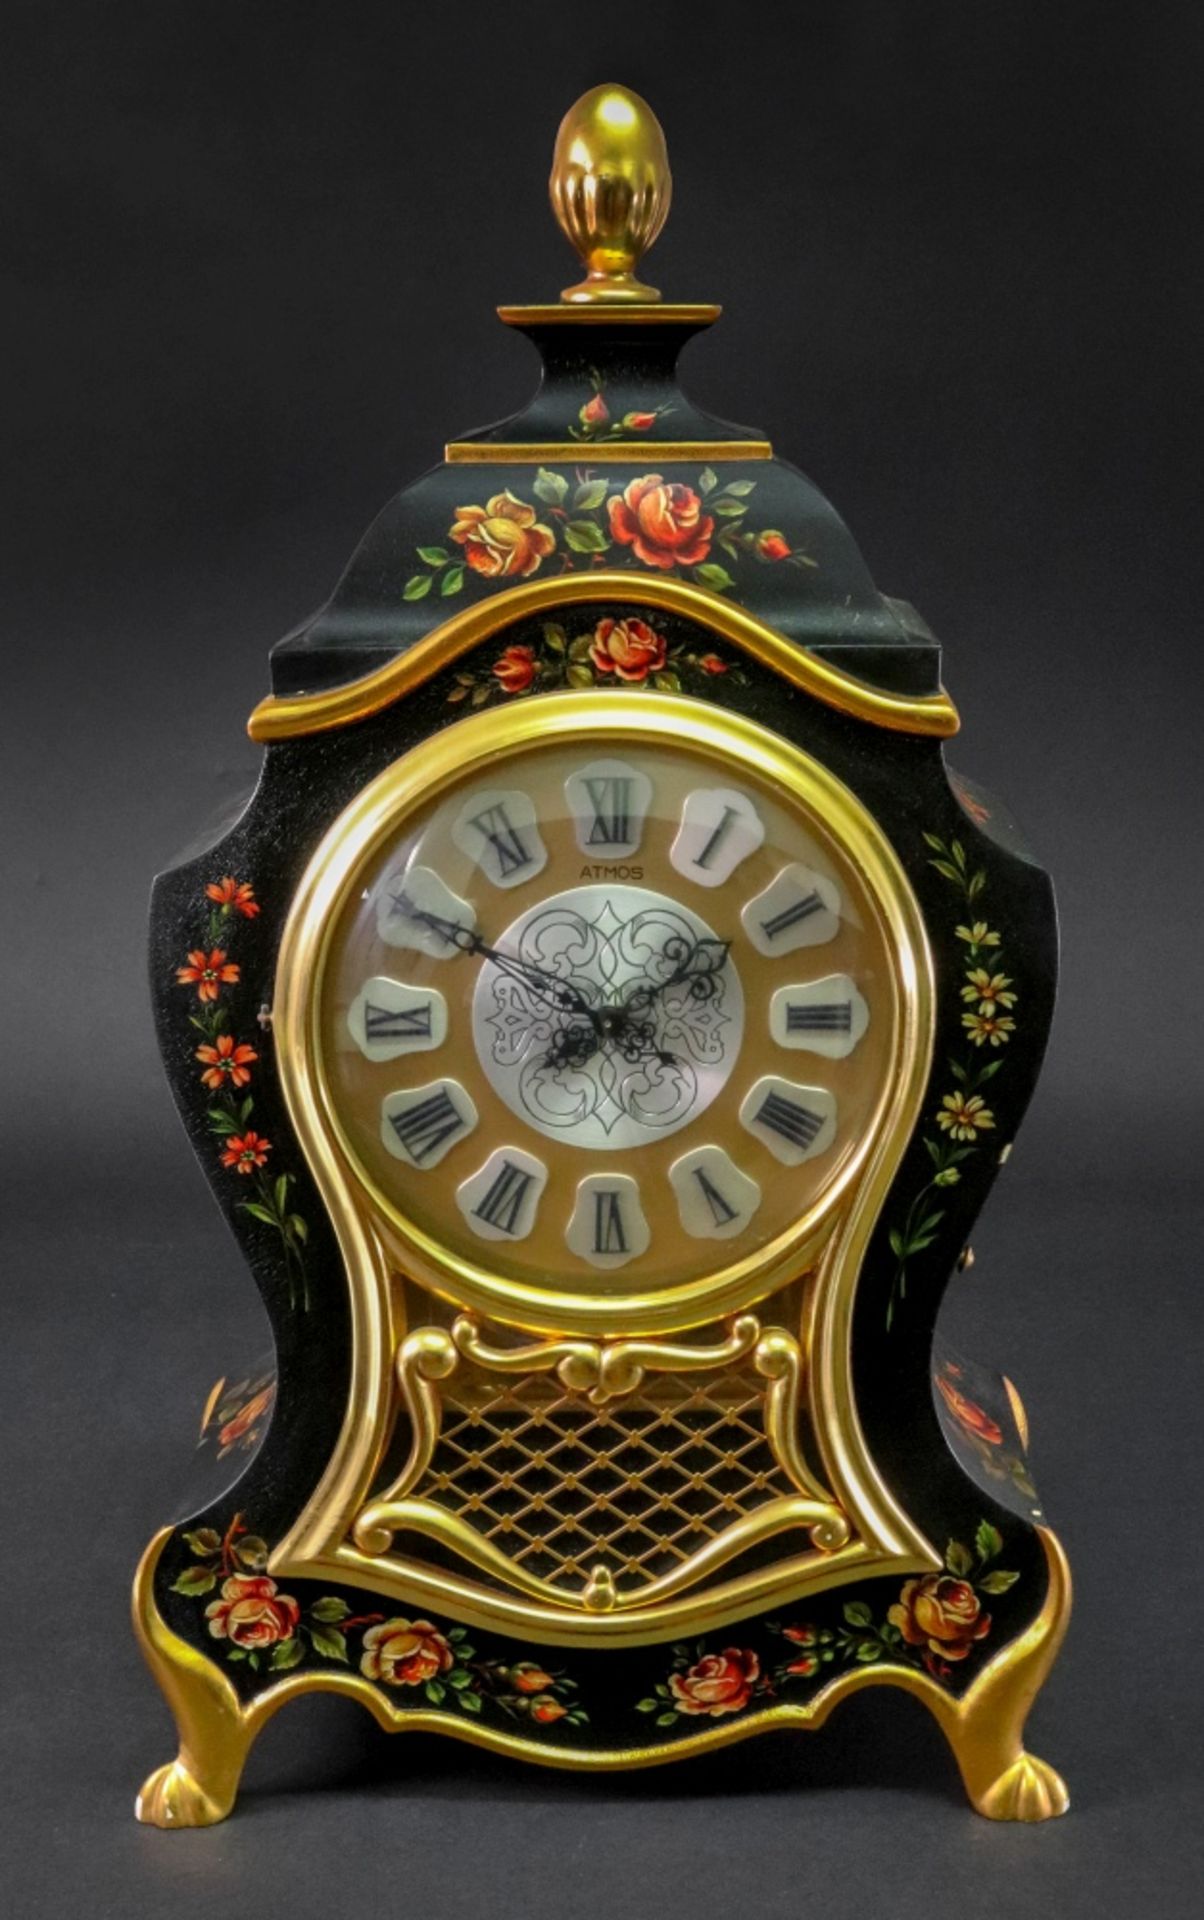 Jaeger-LeCoultre Atmos; a bracket clock, in mid 18th century style,